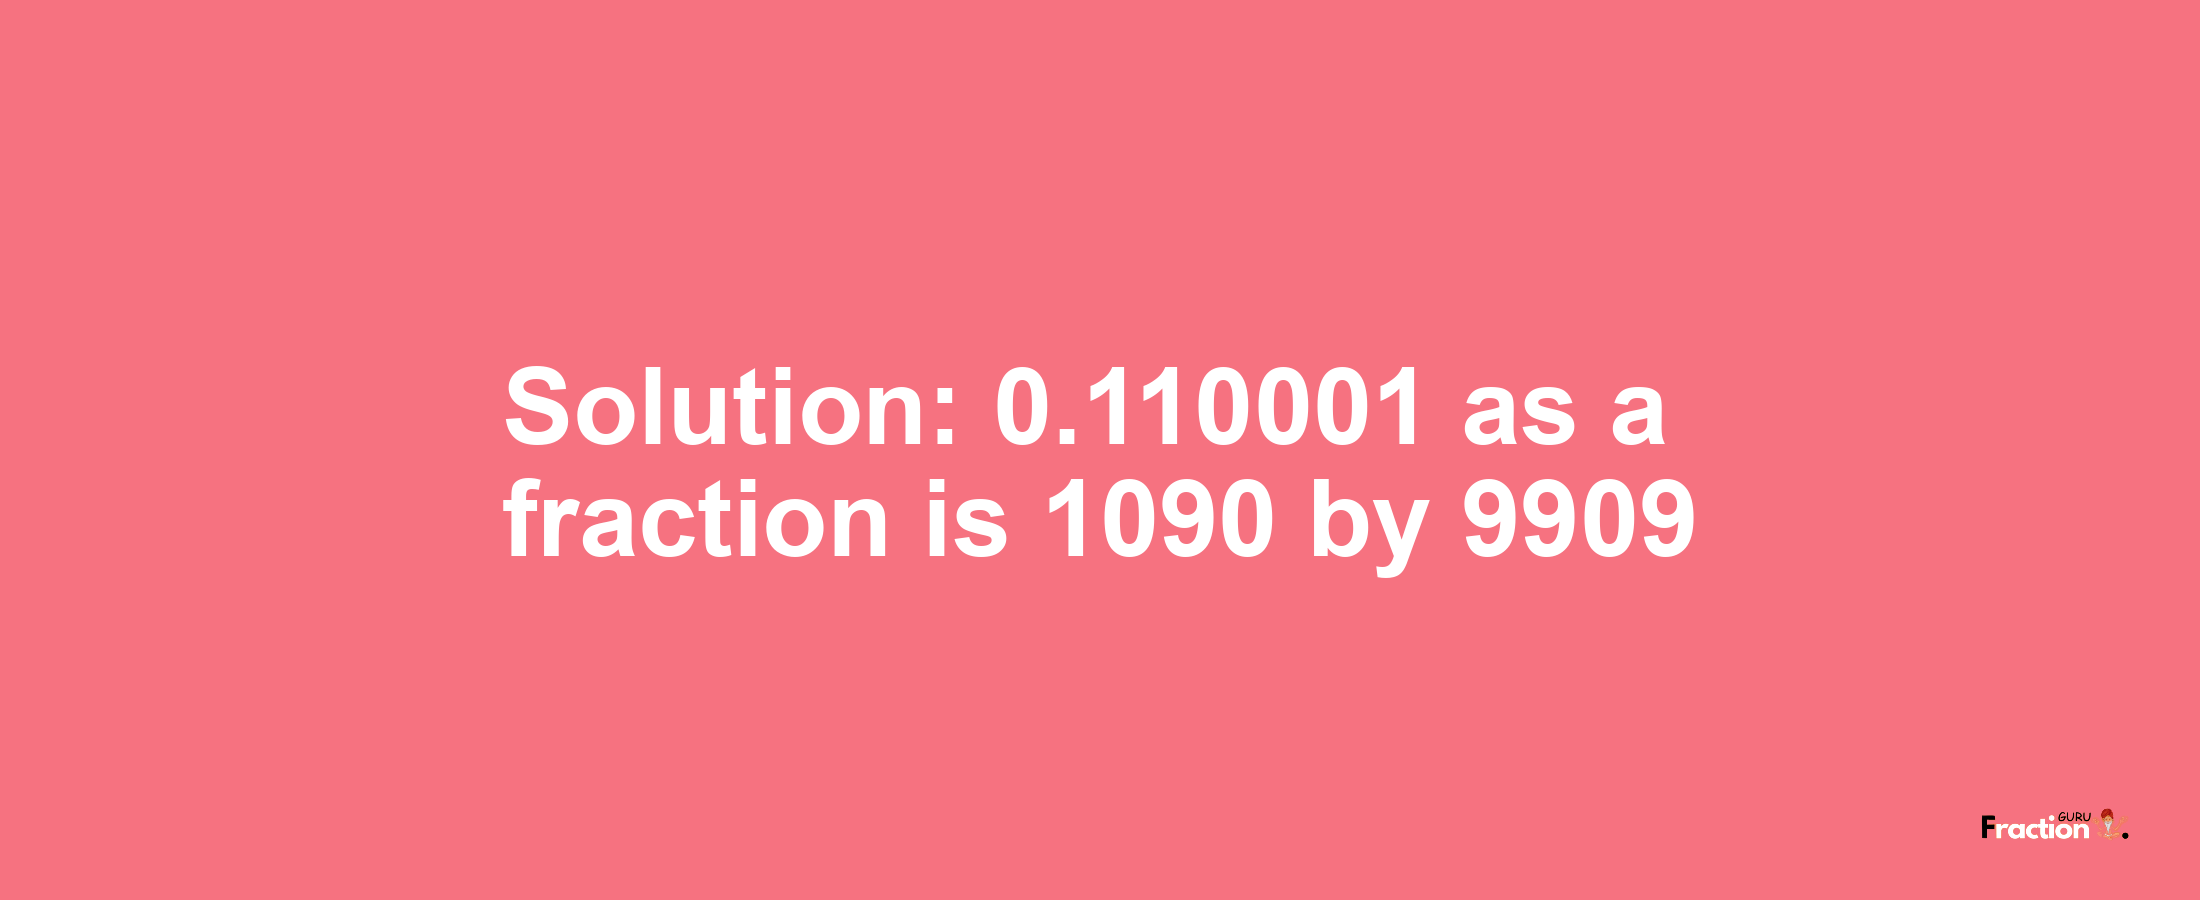 Solution:0.110001 as a fraction is 1090/9909